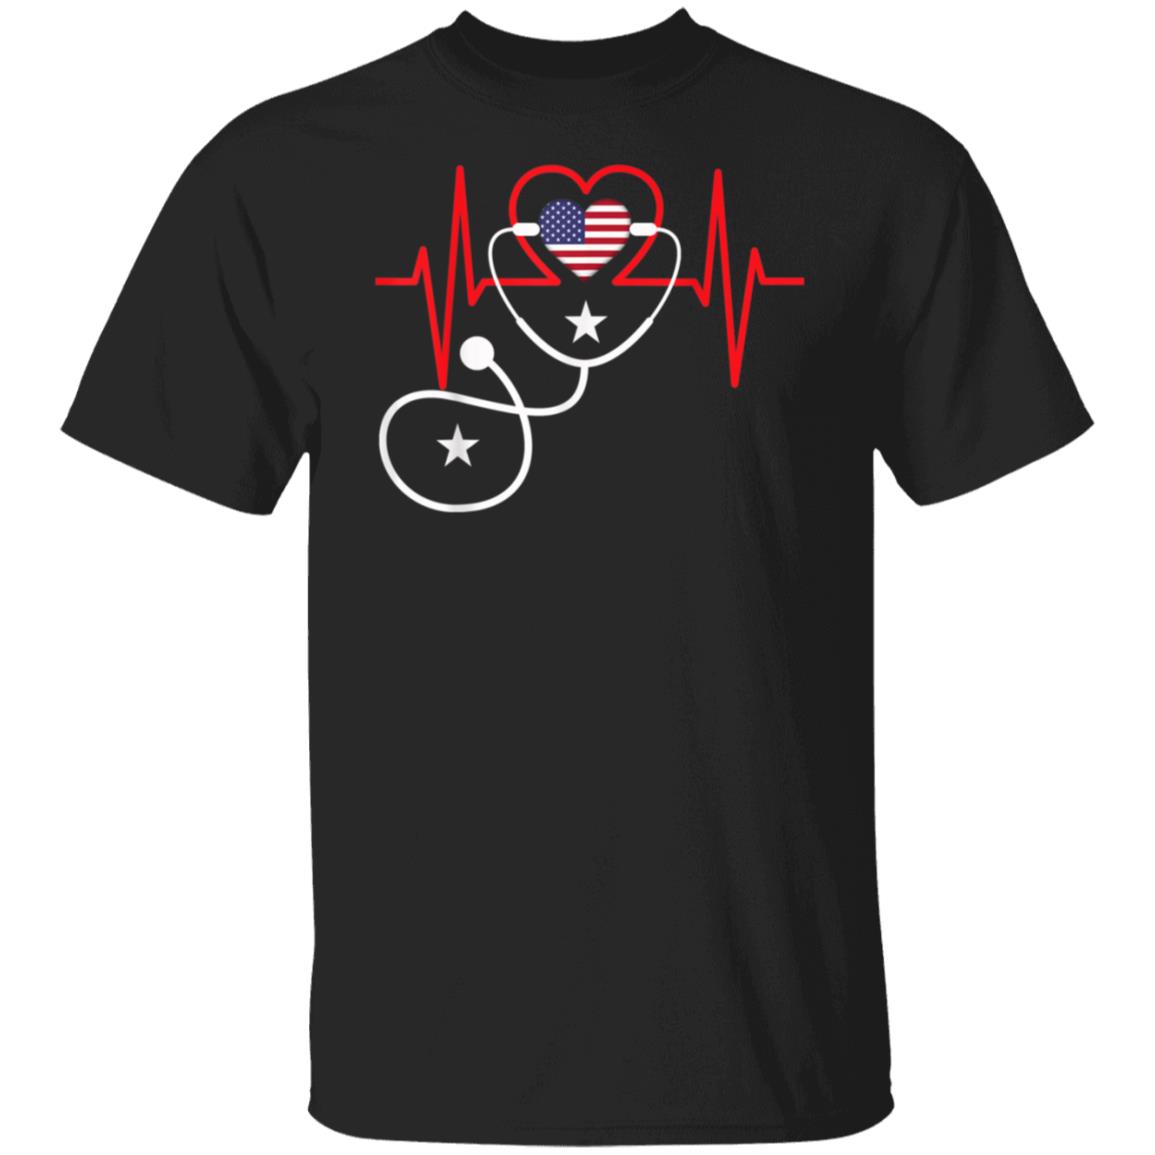 Nurse Patriotic T-Shirt For The 4th Of July For Men Women